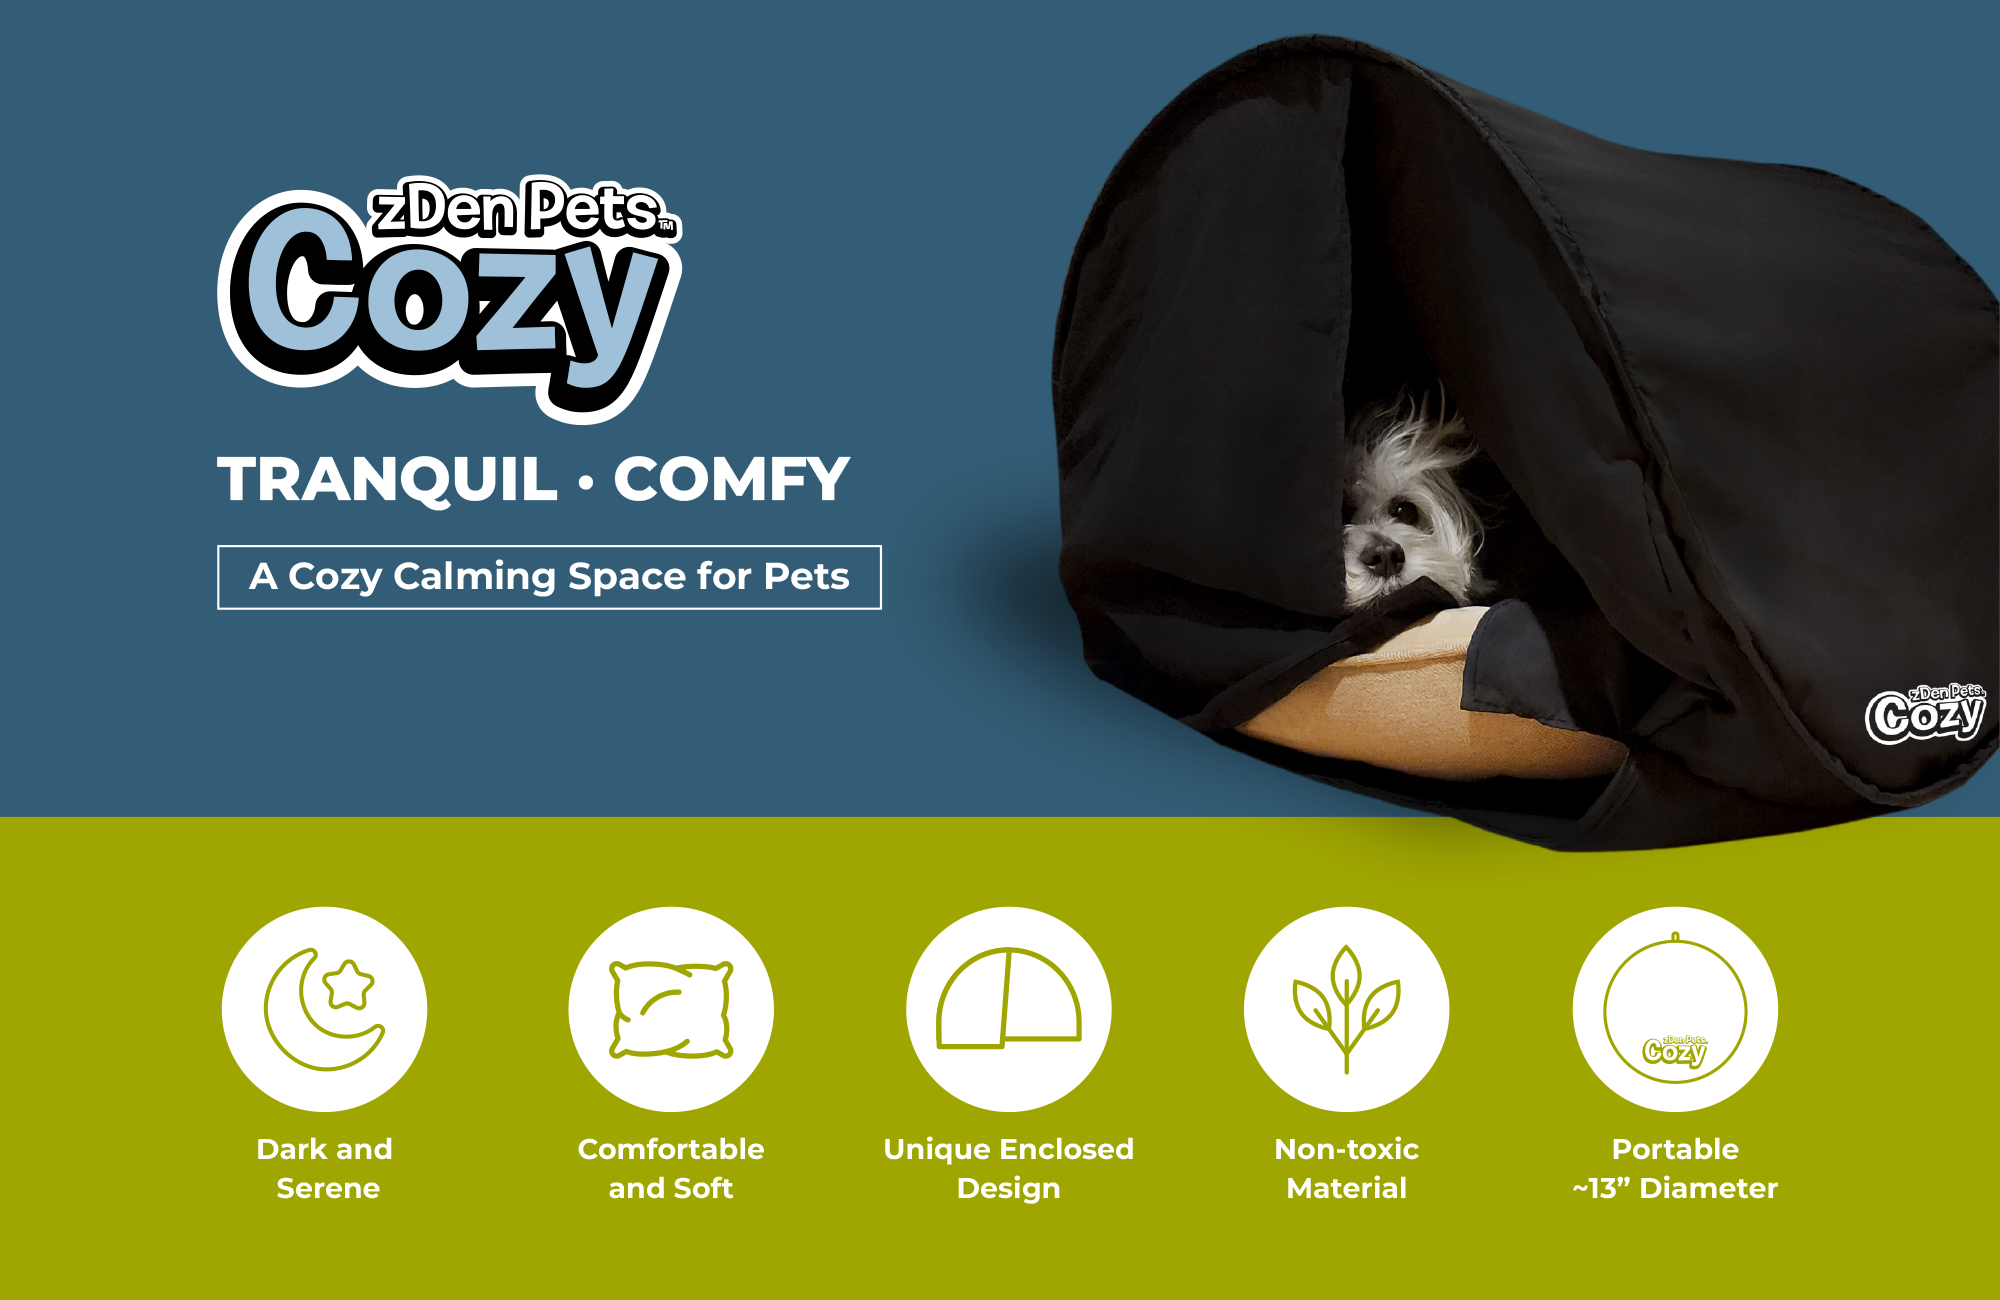 a photo of a dog in a zDen Pets Cozy. A dark calming tent for dogs and cats. Also the main features which are that is a dark and serene, comfortable and soft, enclosed, made with non-toxic materials and is portable (when packed, it is only 13" diameter)